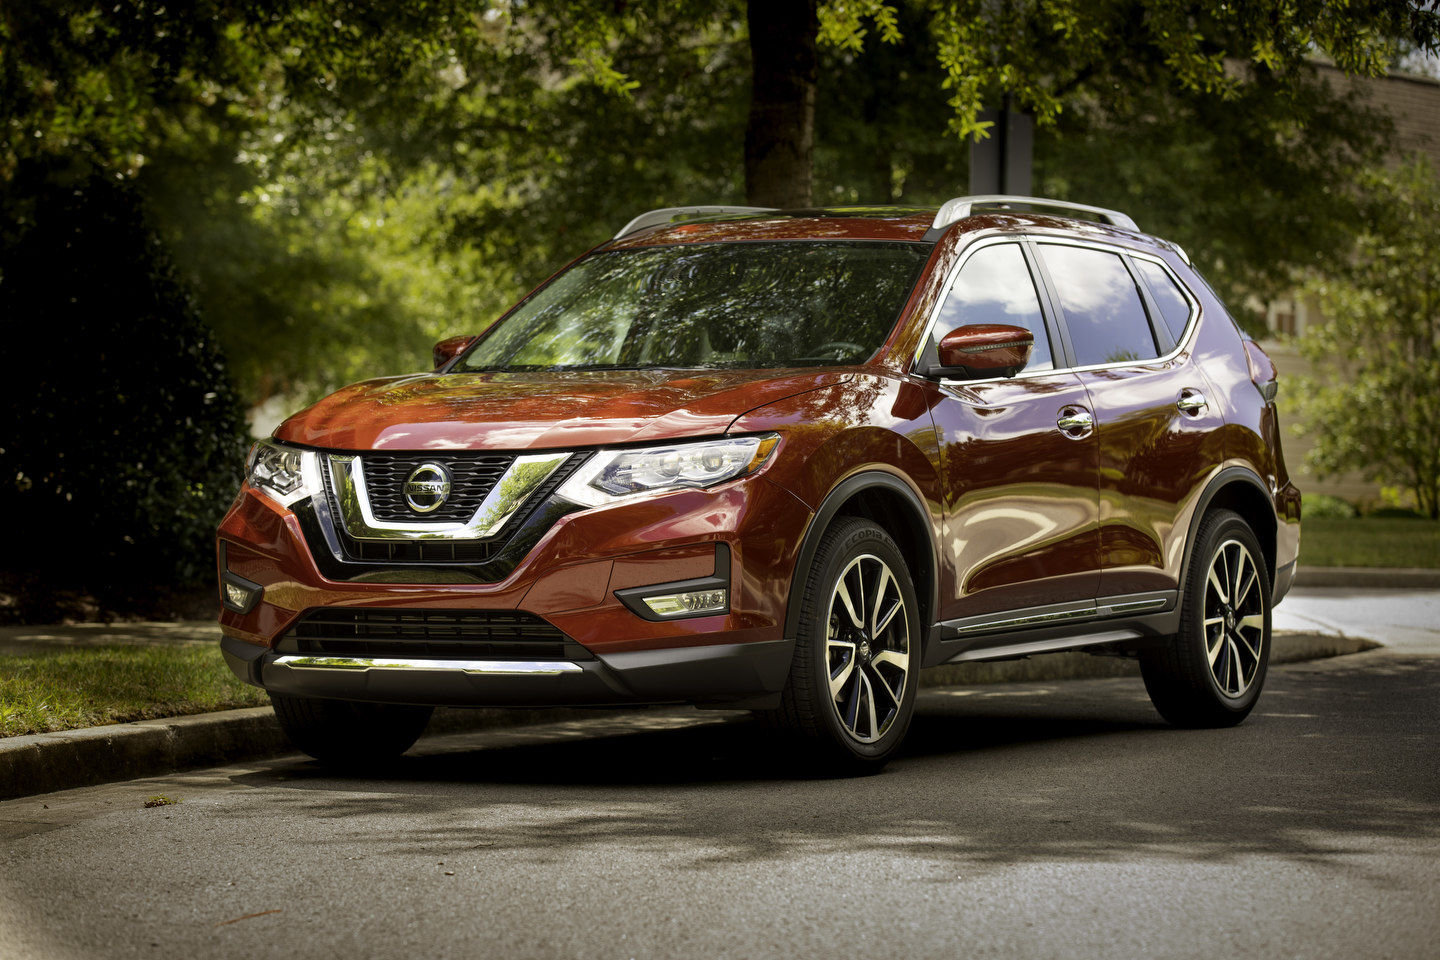 3 Reasons to Buy a Pre-Owned Nissan Rogue SUV